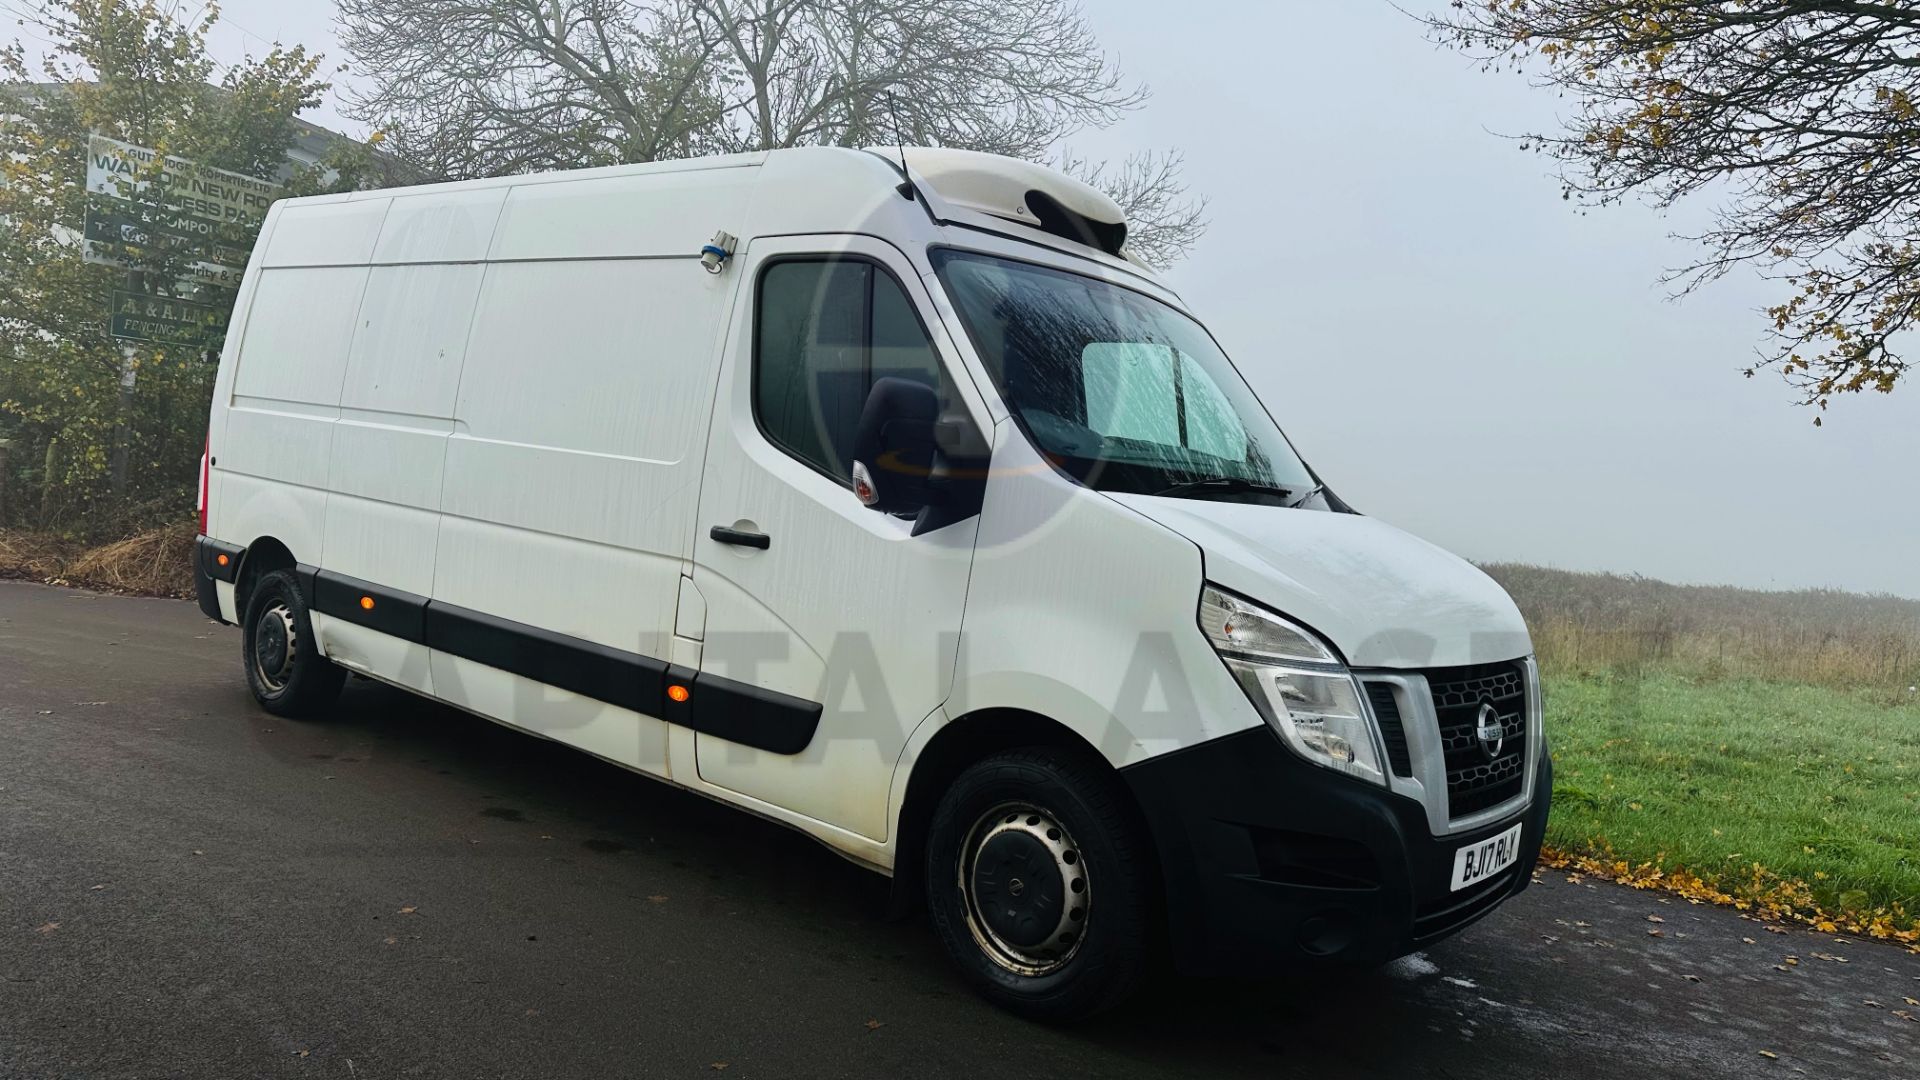 (ON SALE) NISSAN NV400 *LWB - REFRIGERATED VAN* (2017 - EURO 6) 2.3 DCI (3500 KG) *1 OWNER FROM NEW* - Image 3 of 40